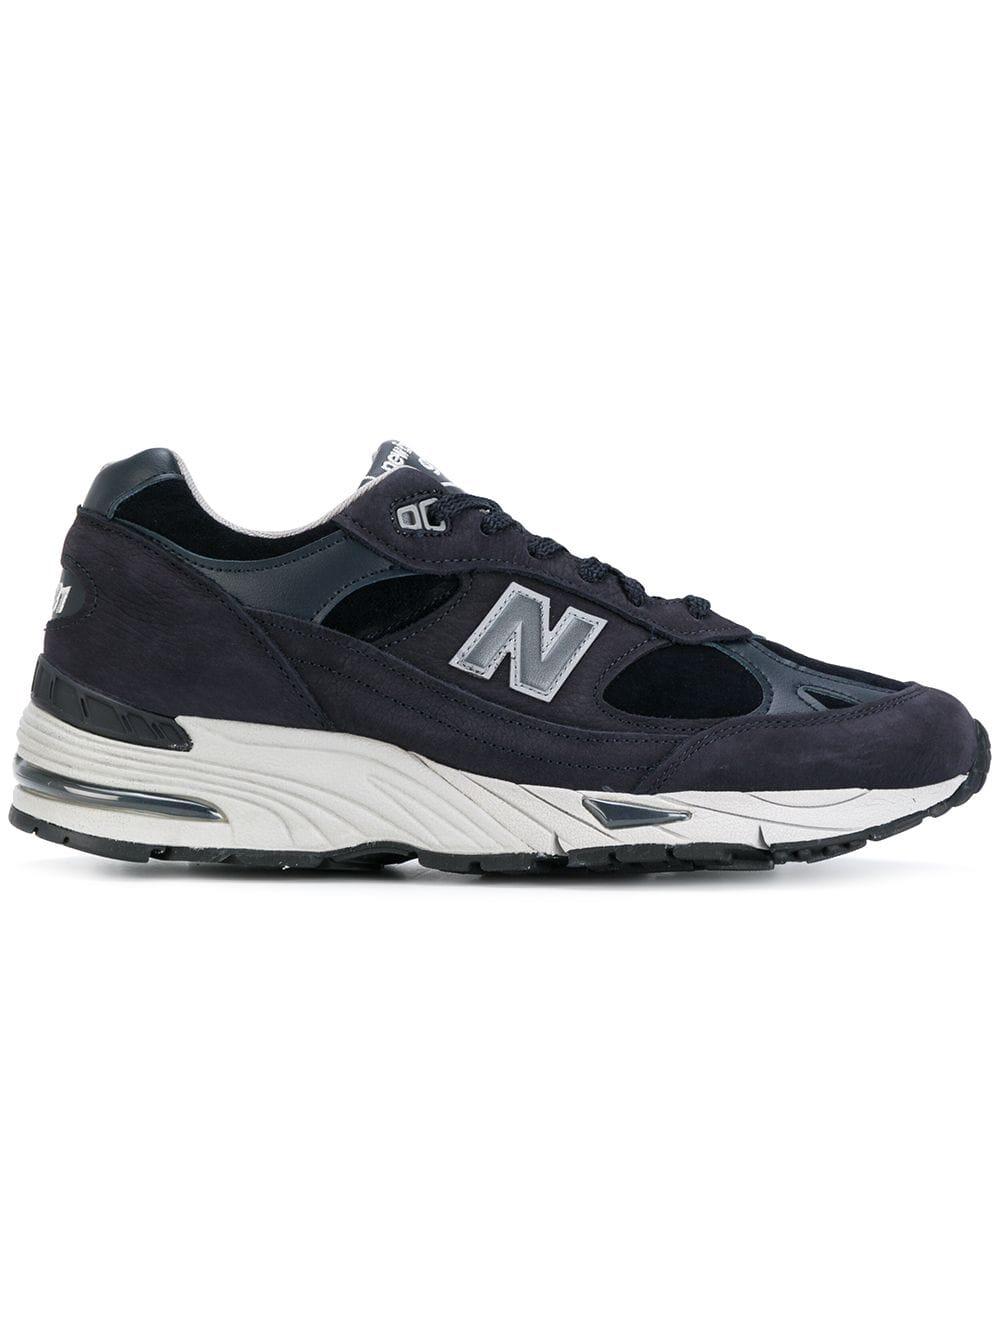 New Balance Leather 991 Sneakers in Blue for Men - Lyst